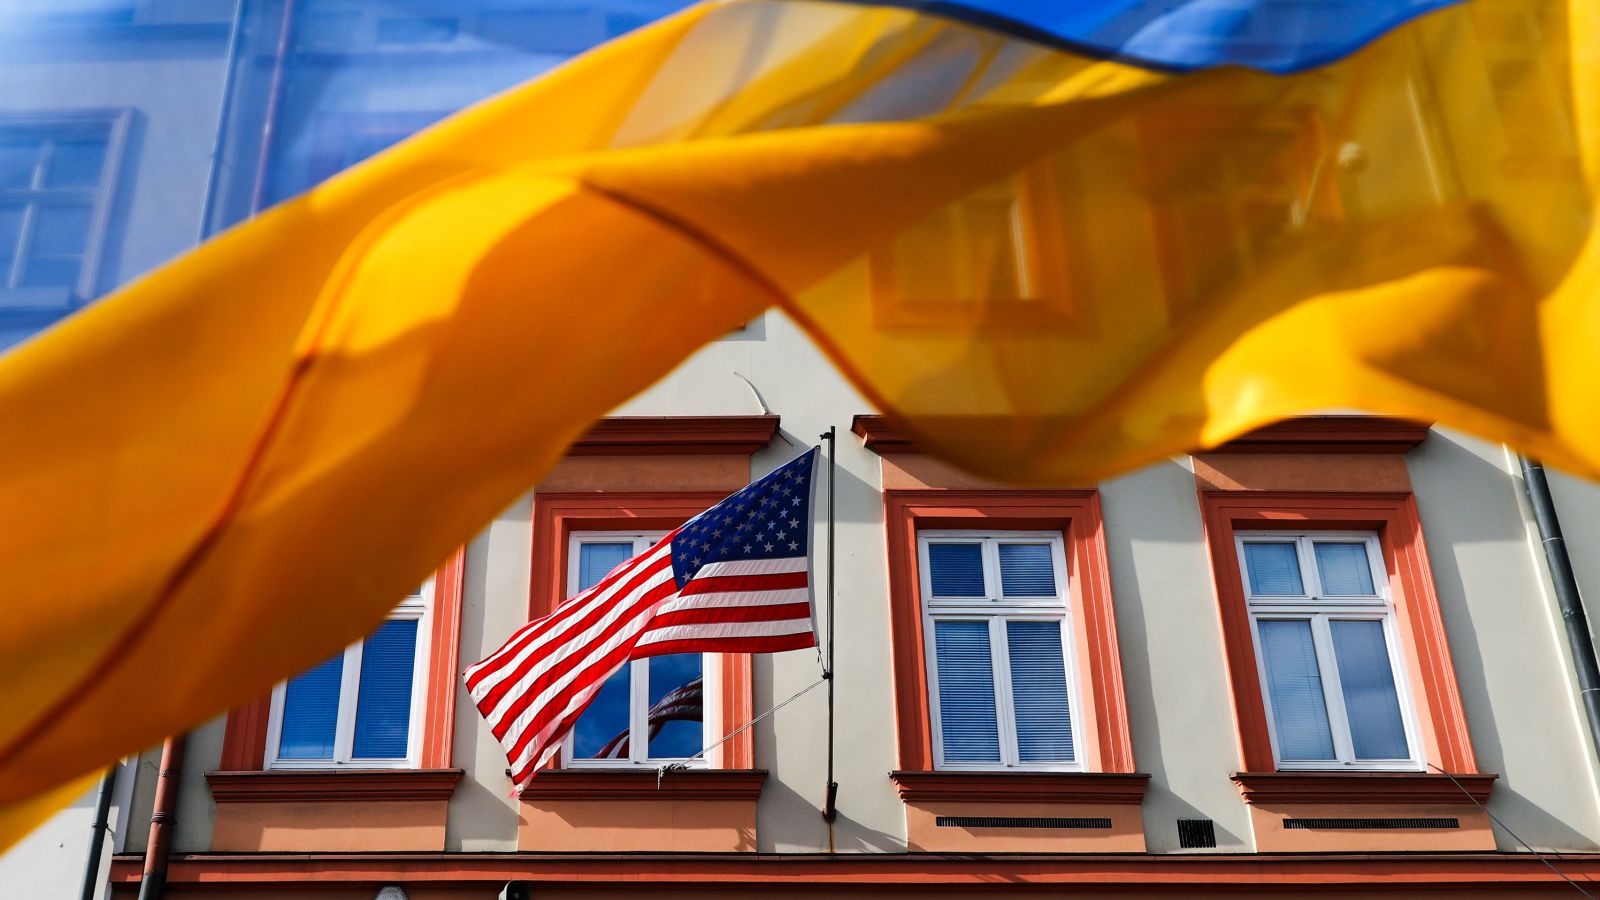 The Ukrainian flag is seen in front of the US Consulate General in Krakow, Poland, on March 10, 2022.